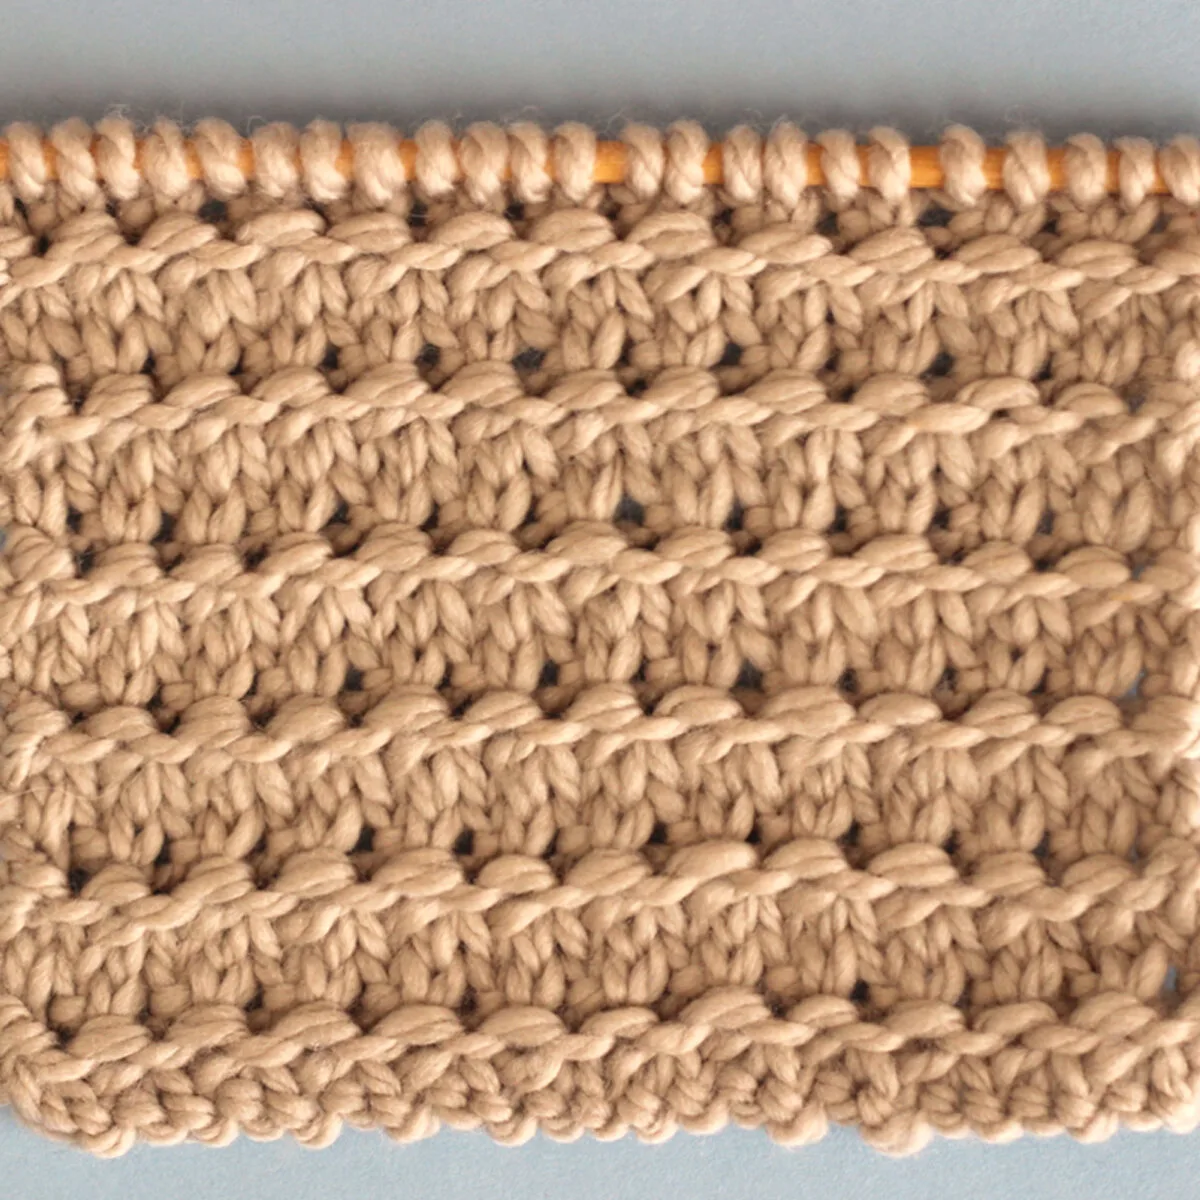 Knitting Swatch in the Granite Stitch Pattern texture in light brown yarn on a wooden bamboo knitting needle.